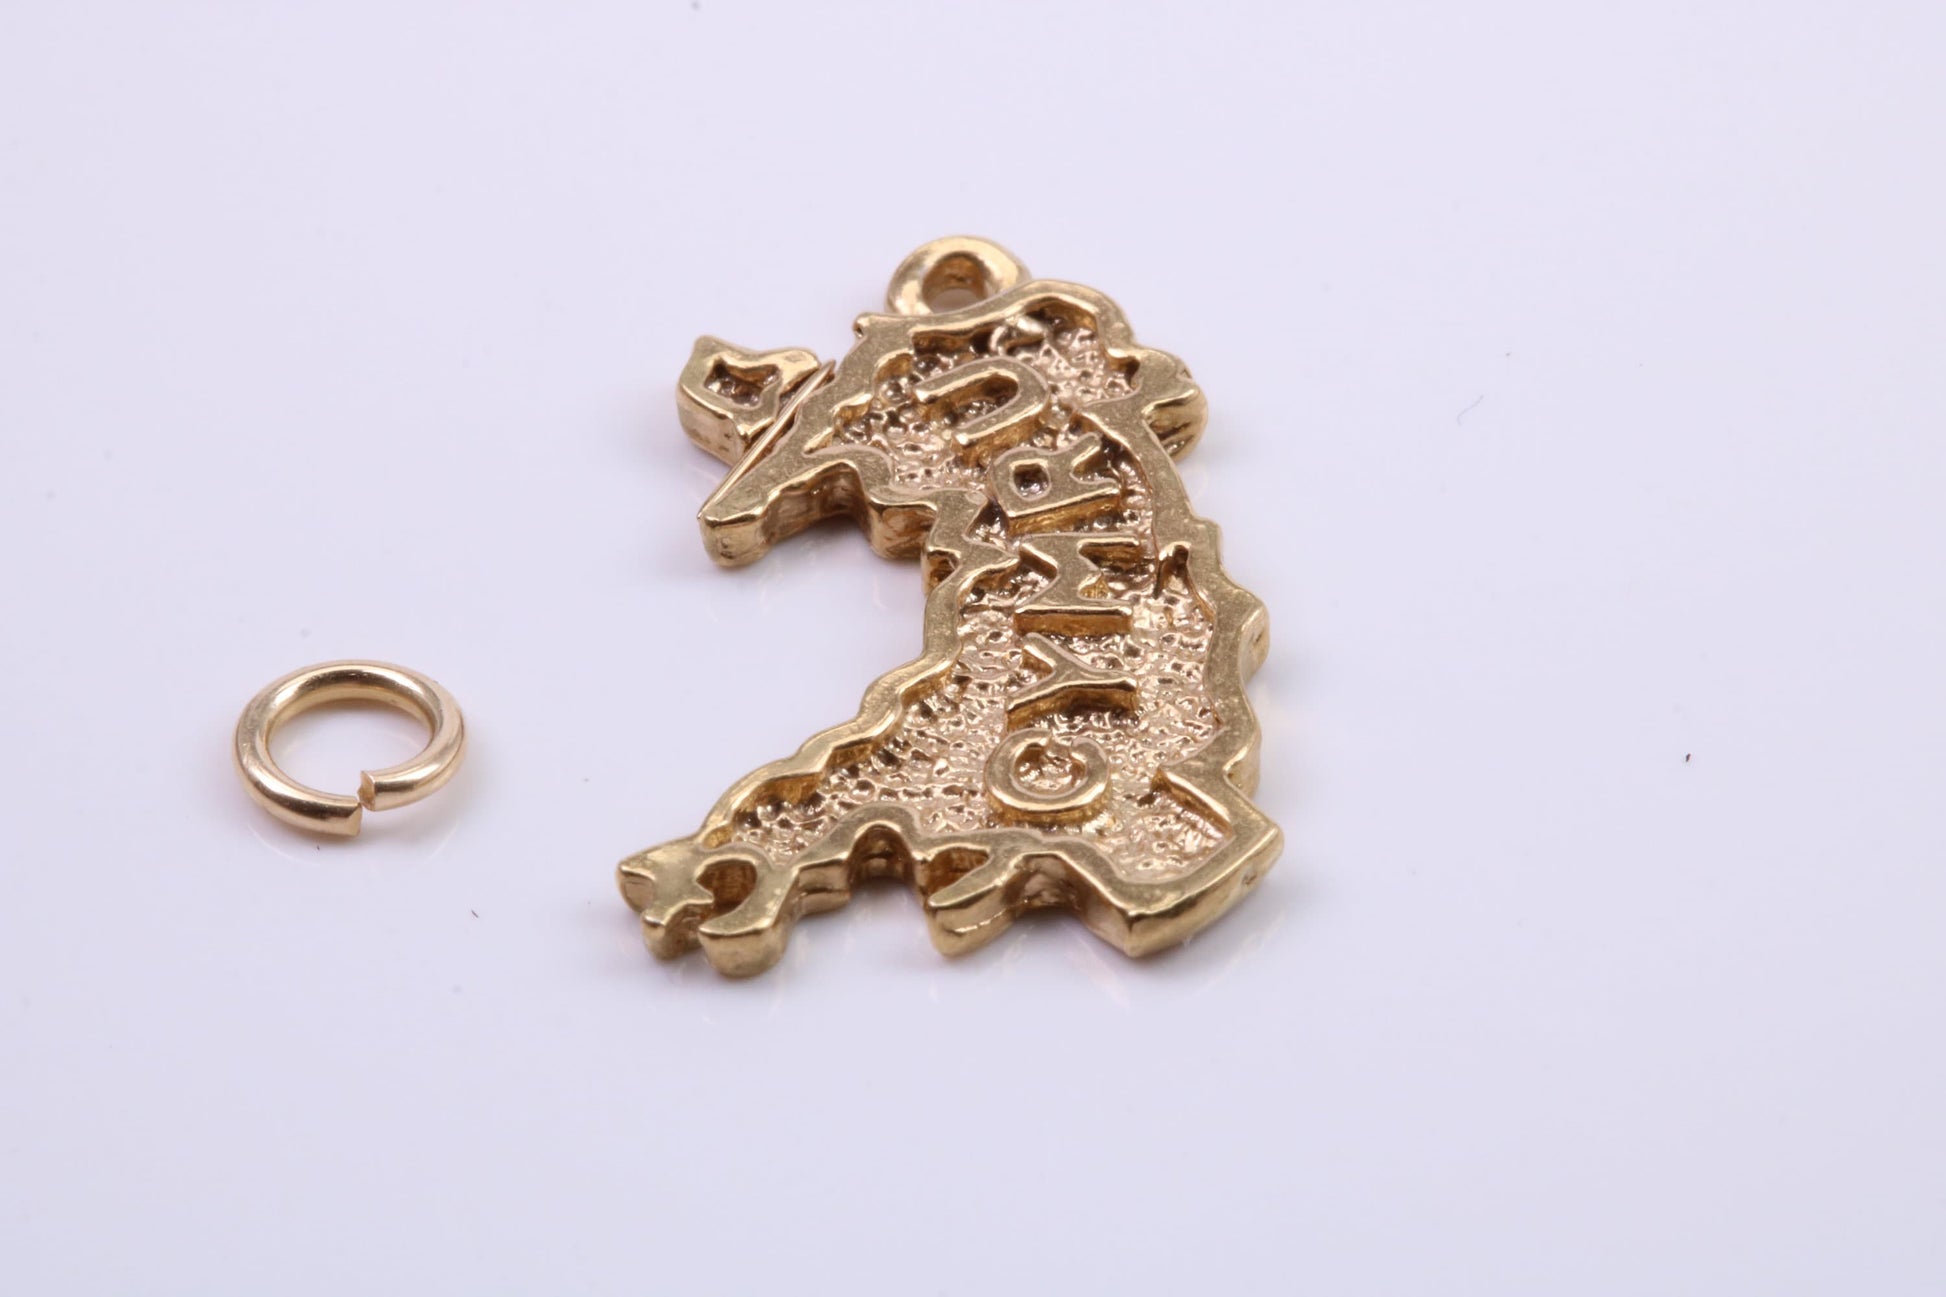 Map of Cymru Charm, Traditional Charm, Made from Solid 9ct Yellow Gold, British Hallmarked, Complete with Attachment Link